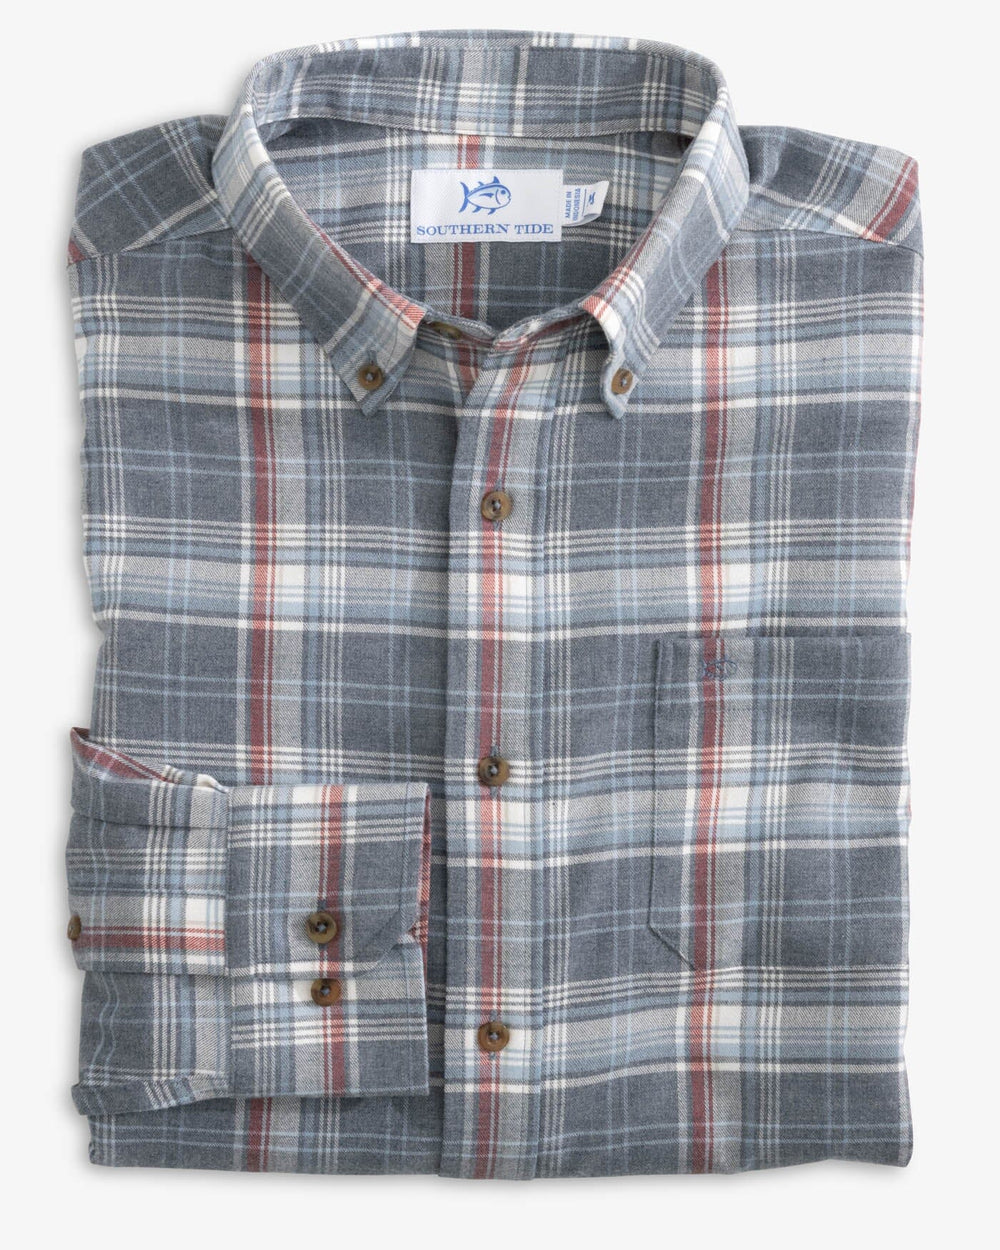 The front view of the Southern Tide Heather Longleaf Plaid Intercoastal Flannel Sport Shirts by Southern Tide - Heather Dress Blue